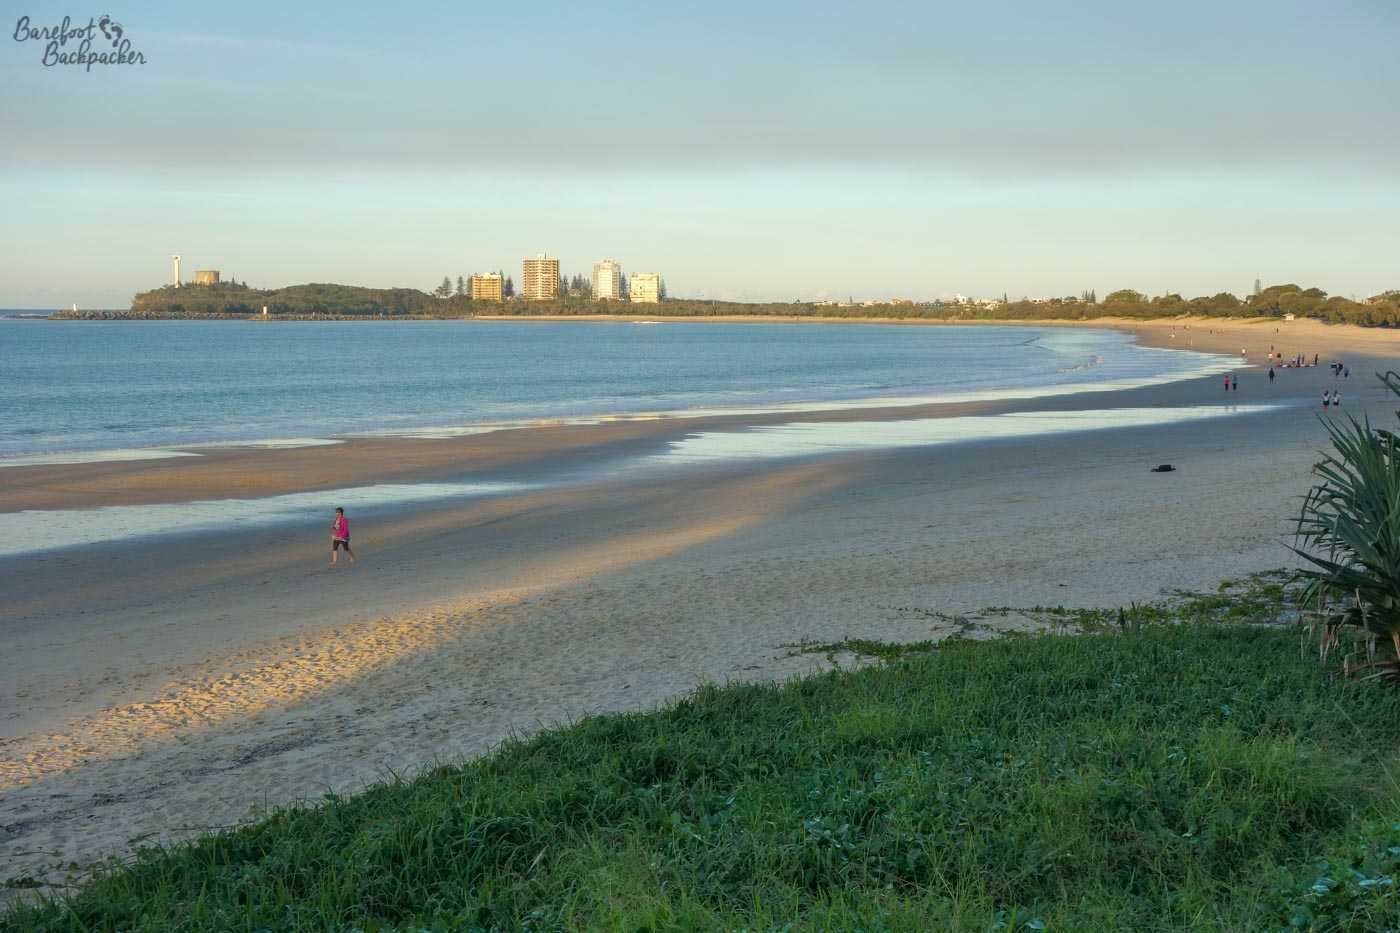 Mooloolaba beach. A wide curvy bay, which curls round to the left to end at a spit in the middle of the background. There's a couple of people on said beach, but otherwise it's sand and sea. Because it's a beach.